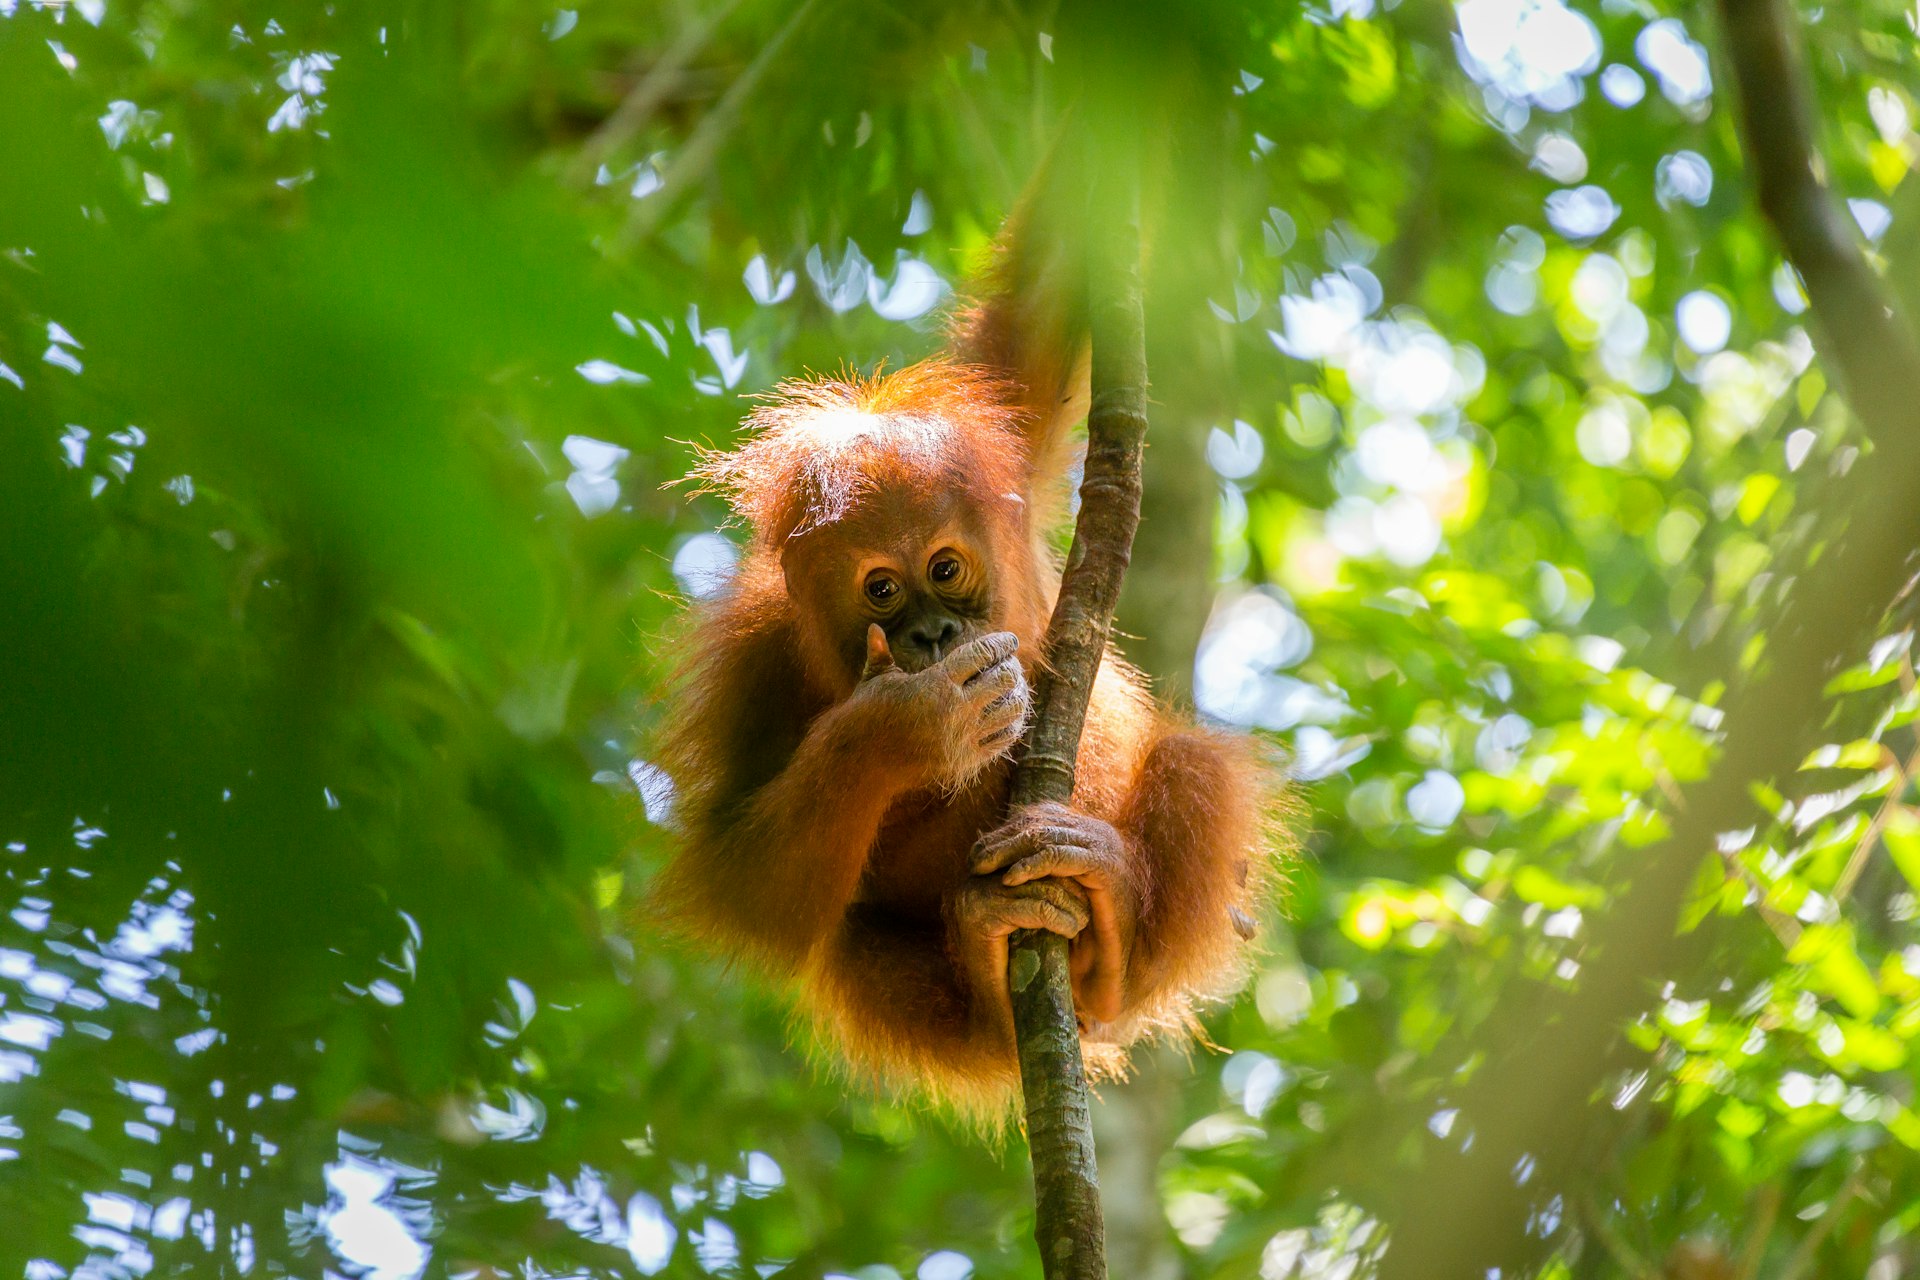 An orangutan hanging in a tree covering its mouth in the wilds of Indonesia